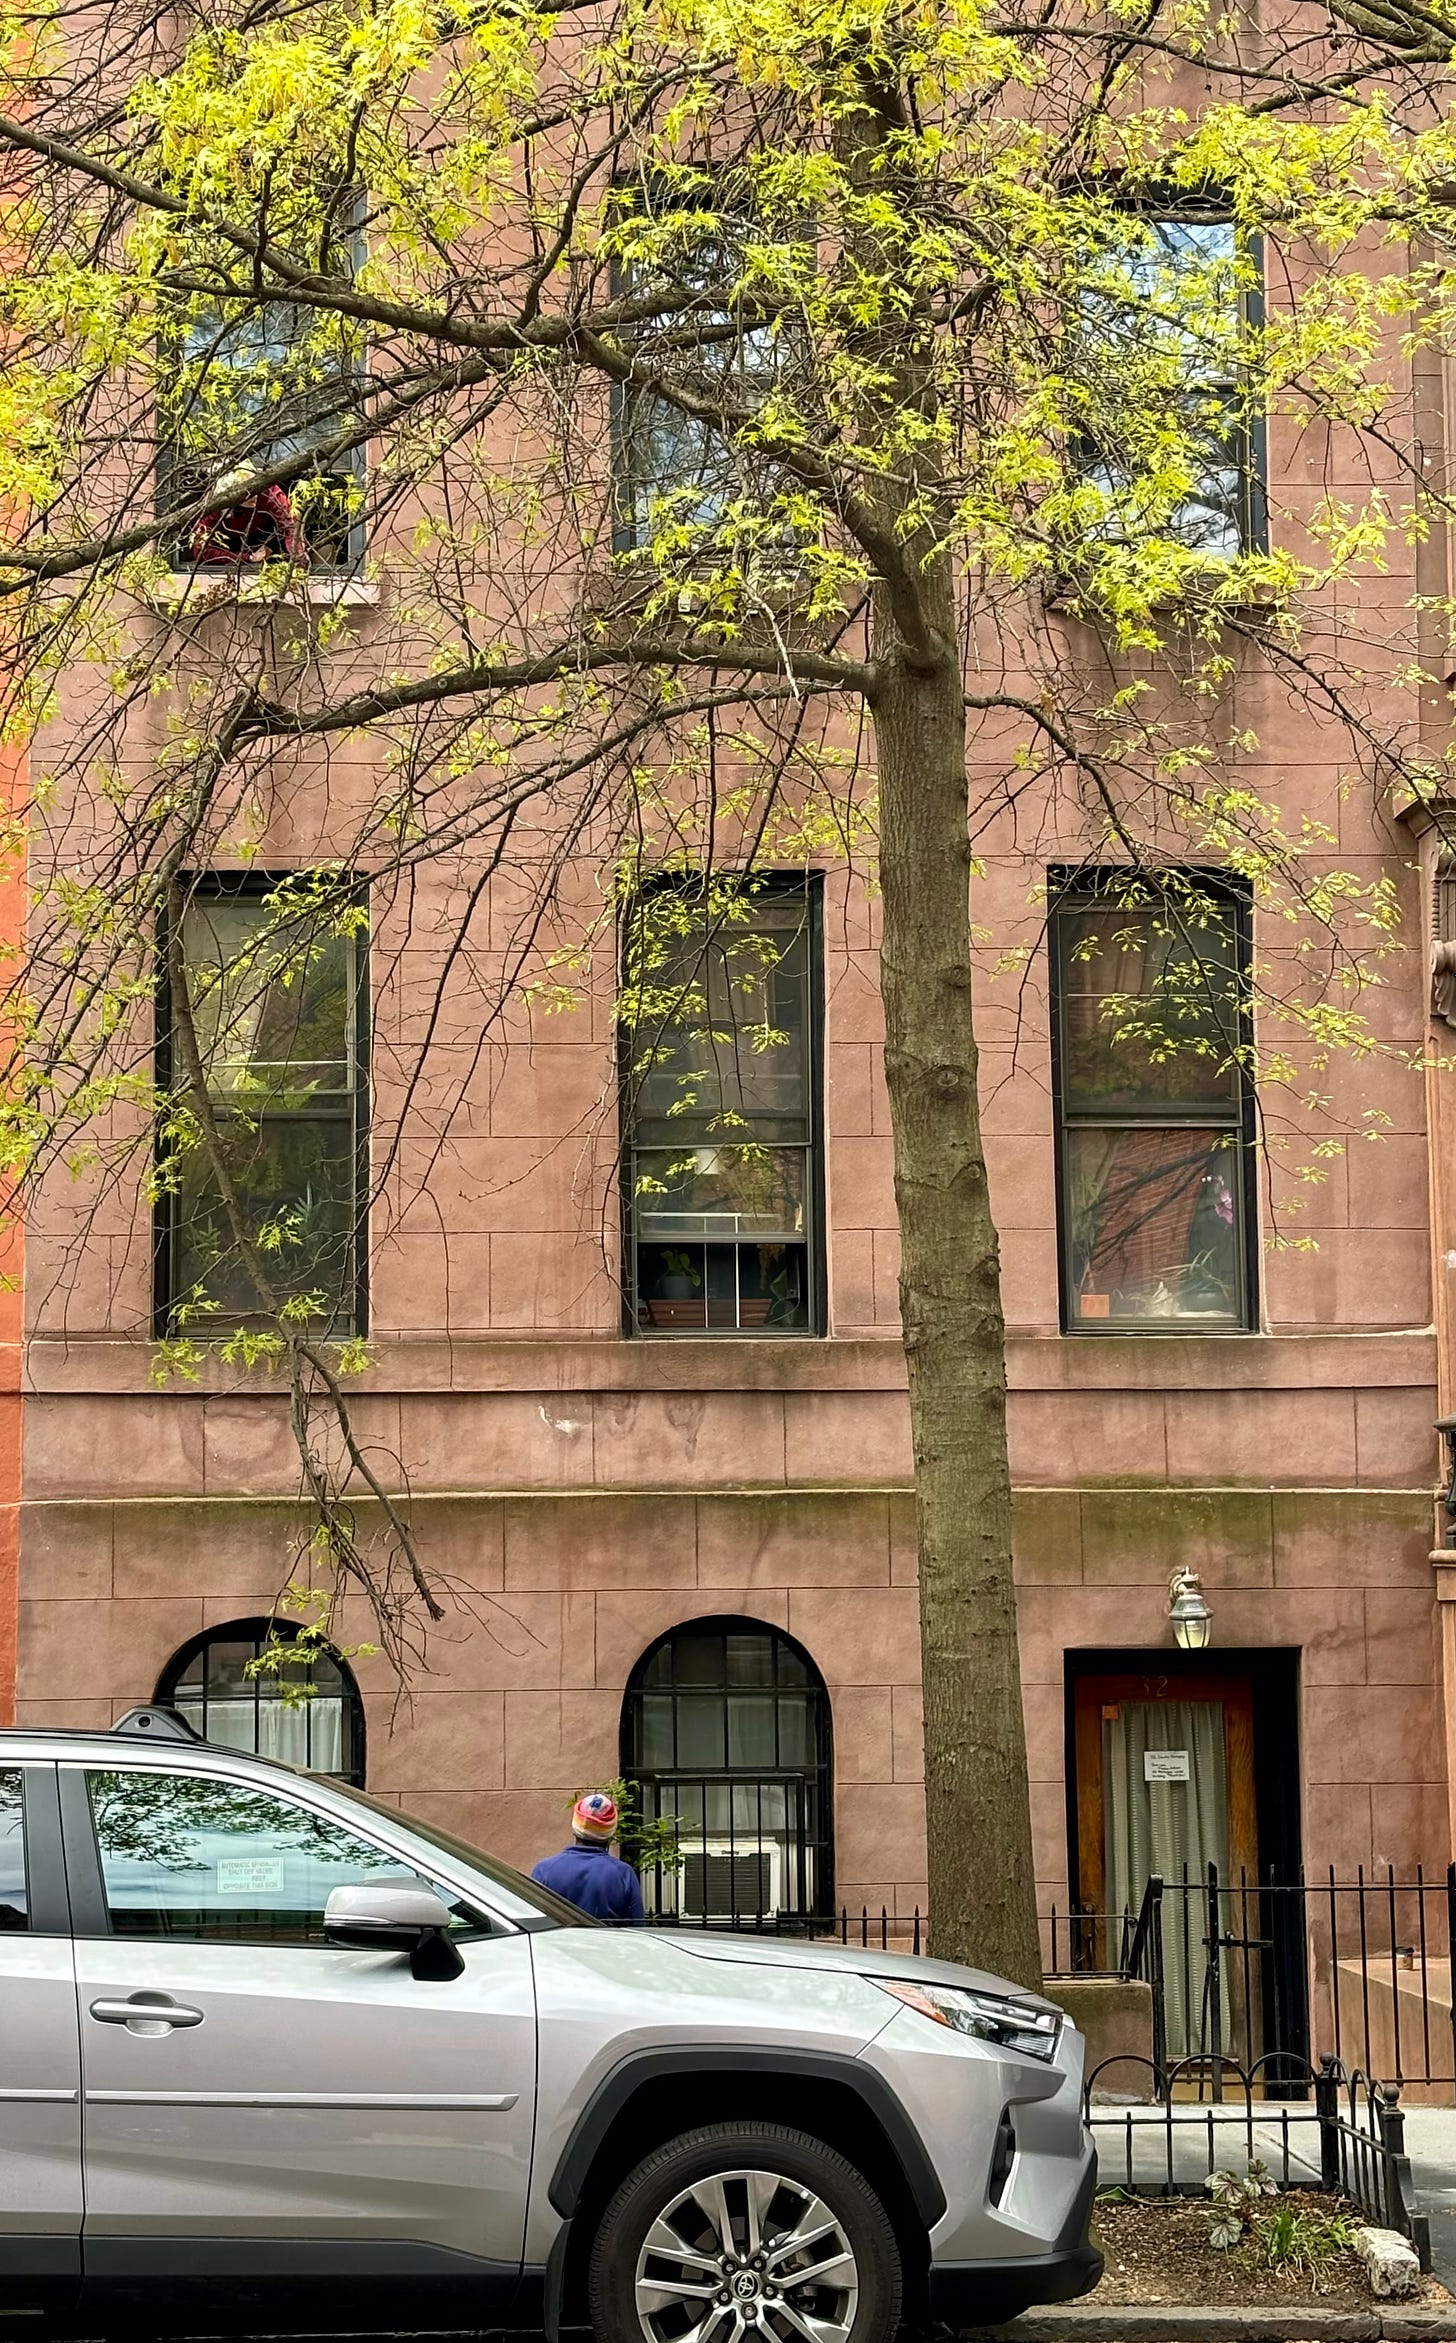 A terra cotta colored apartment building on a quiet Brooklyn street. A resident is leaning out of their window to talk to a person on the sidewalk. There is a tree in front of it starting to bloom green.